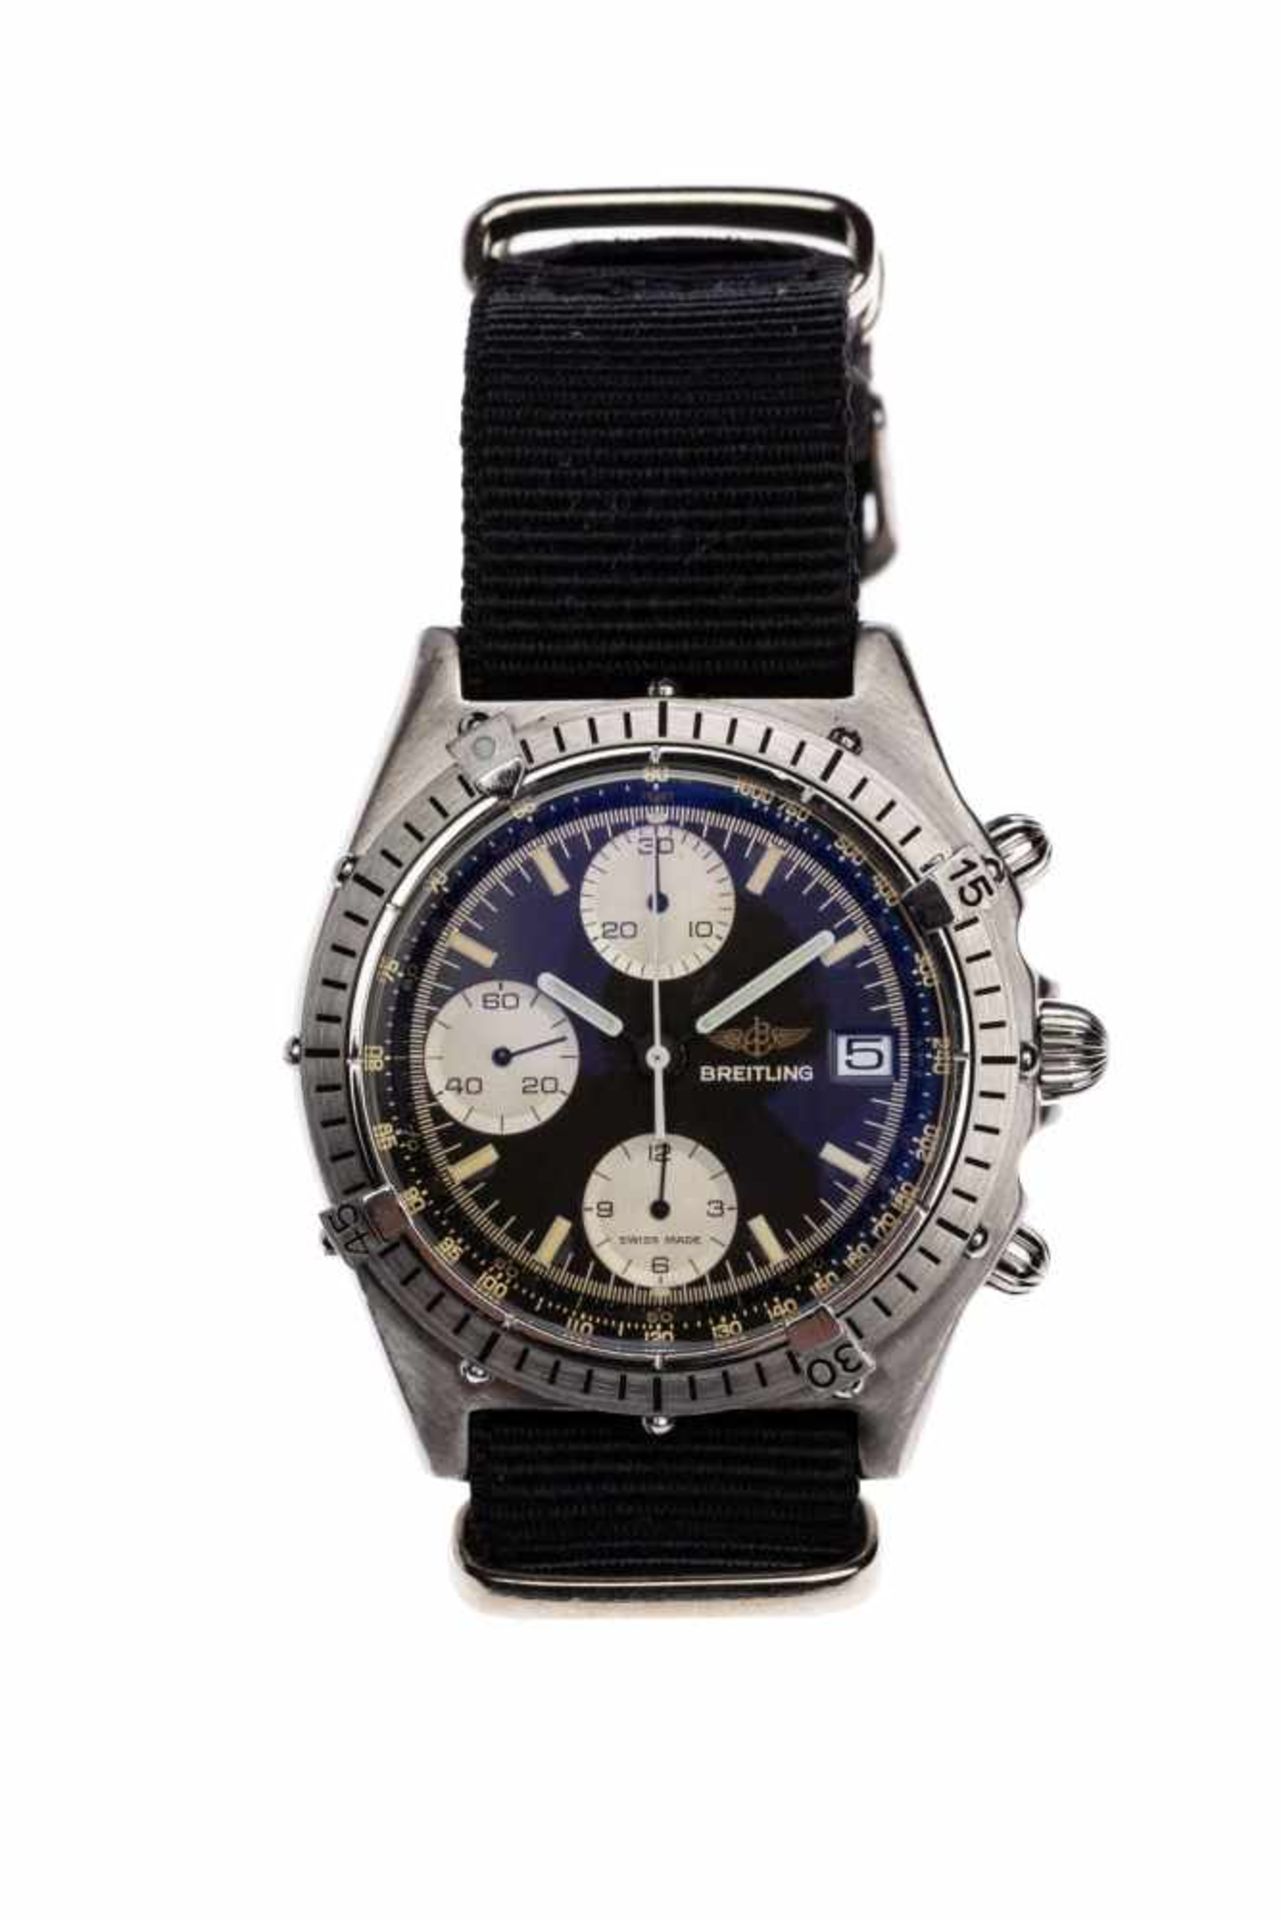 Breitling ChronomatUnisex watch Breitling Chronomat in steel from the 90s, automatic movement with